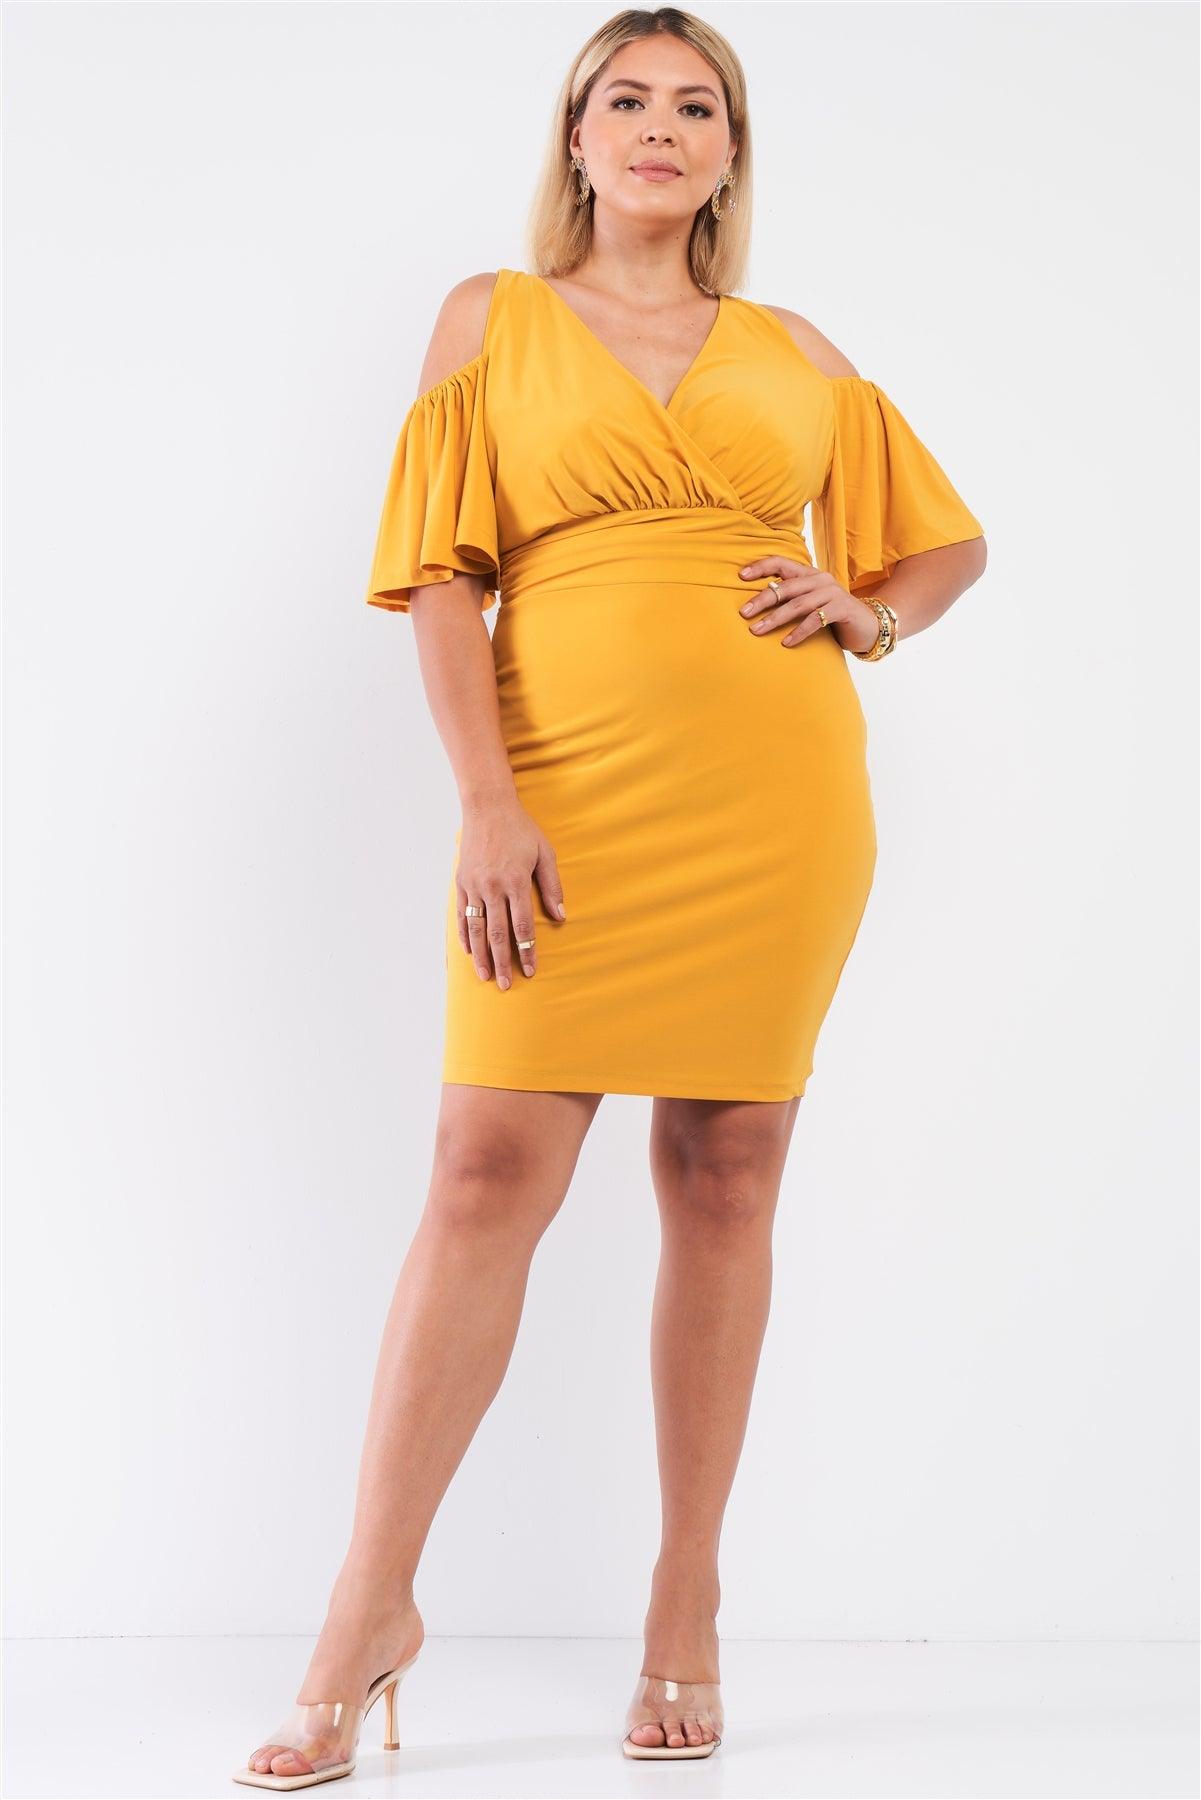 Junior Plus Mustard Yellow Off-The-Shoulder Plunging Wrap V-Neck Fitted Mini Dress /1-1-1